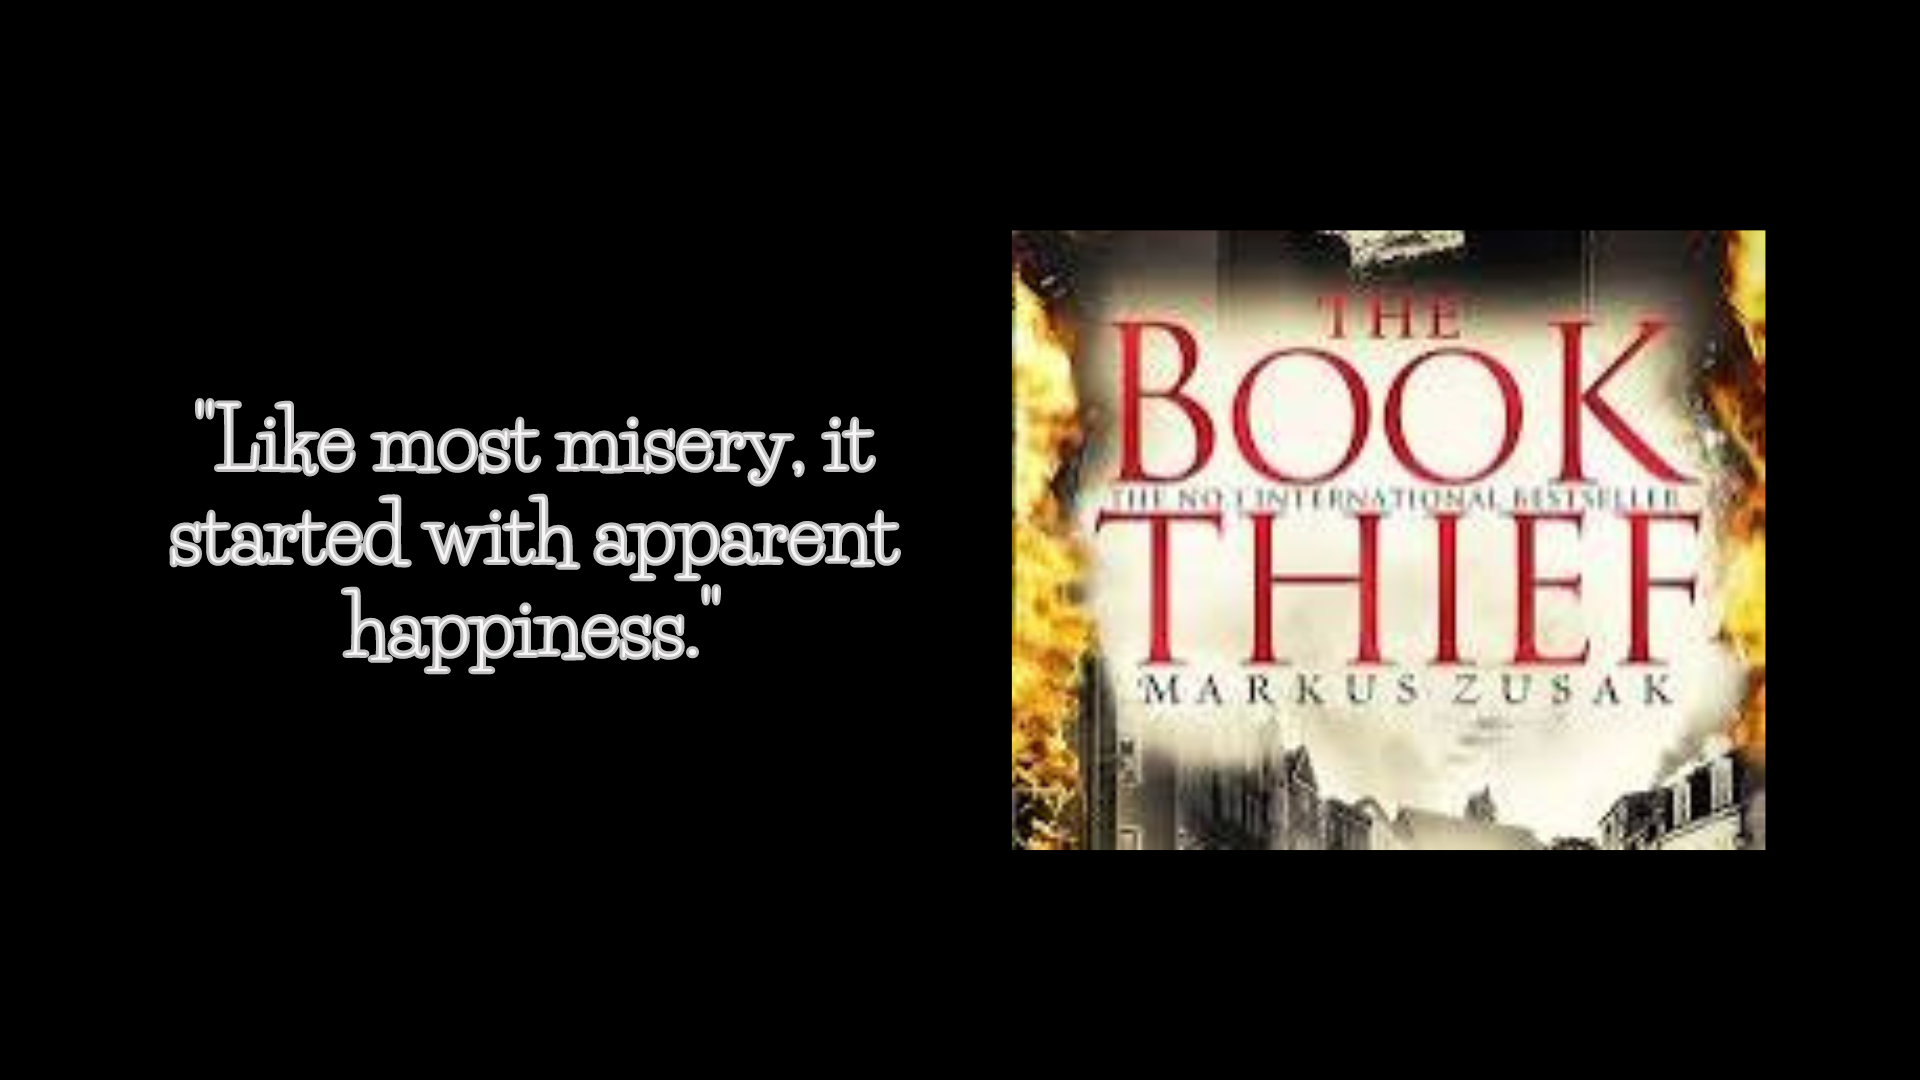 The Book Thief: 10 quotes to find wisdom amidst chaos